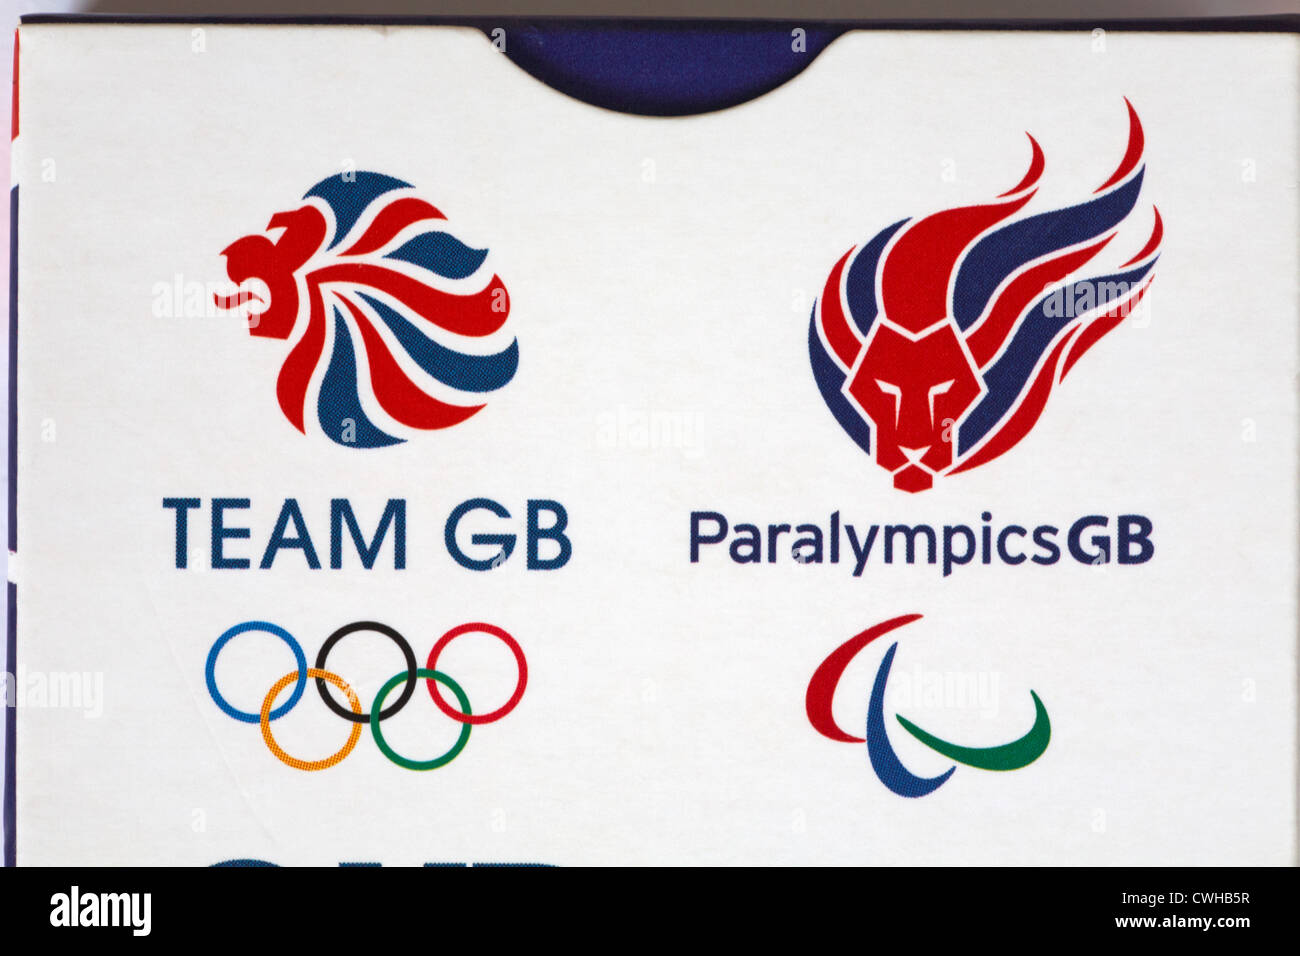 Team Gb And Paralympics Gb Logos On Box Of Pack Of Cards Provided To Olympians For The London 2012 Olympic Games In August Stock Photo Alamy